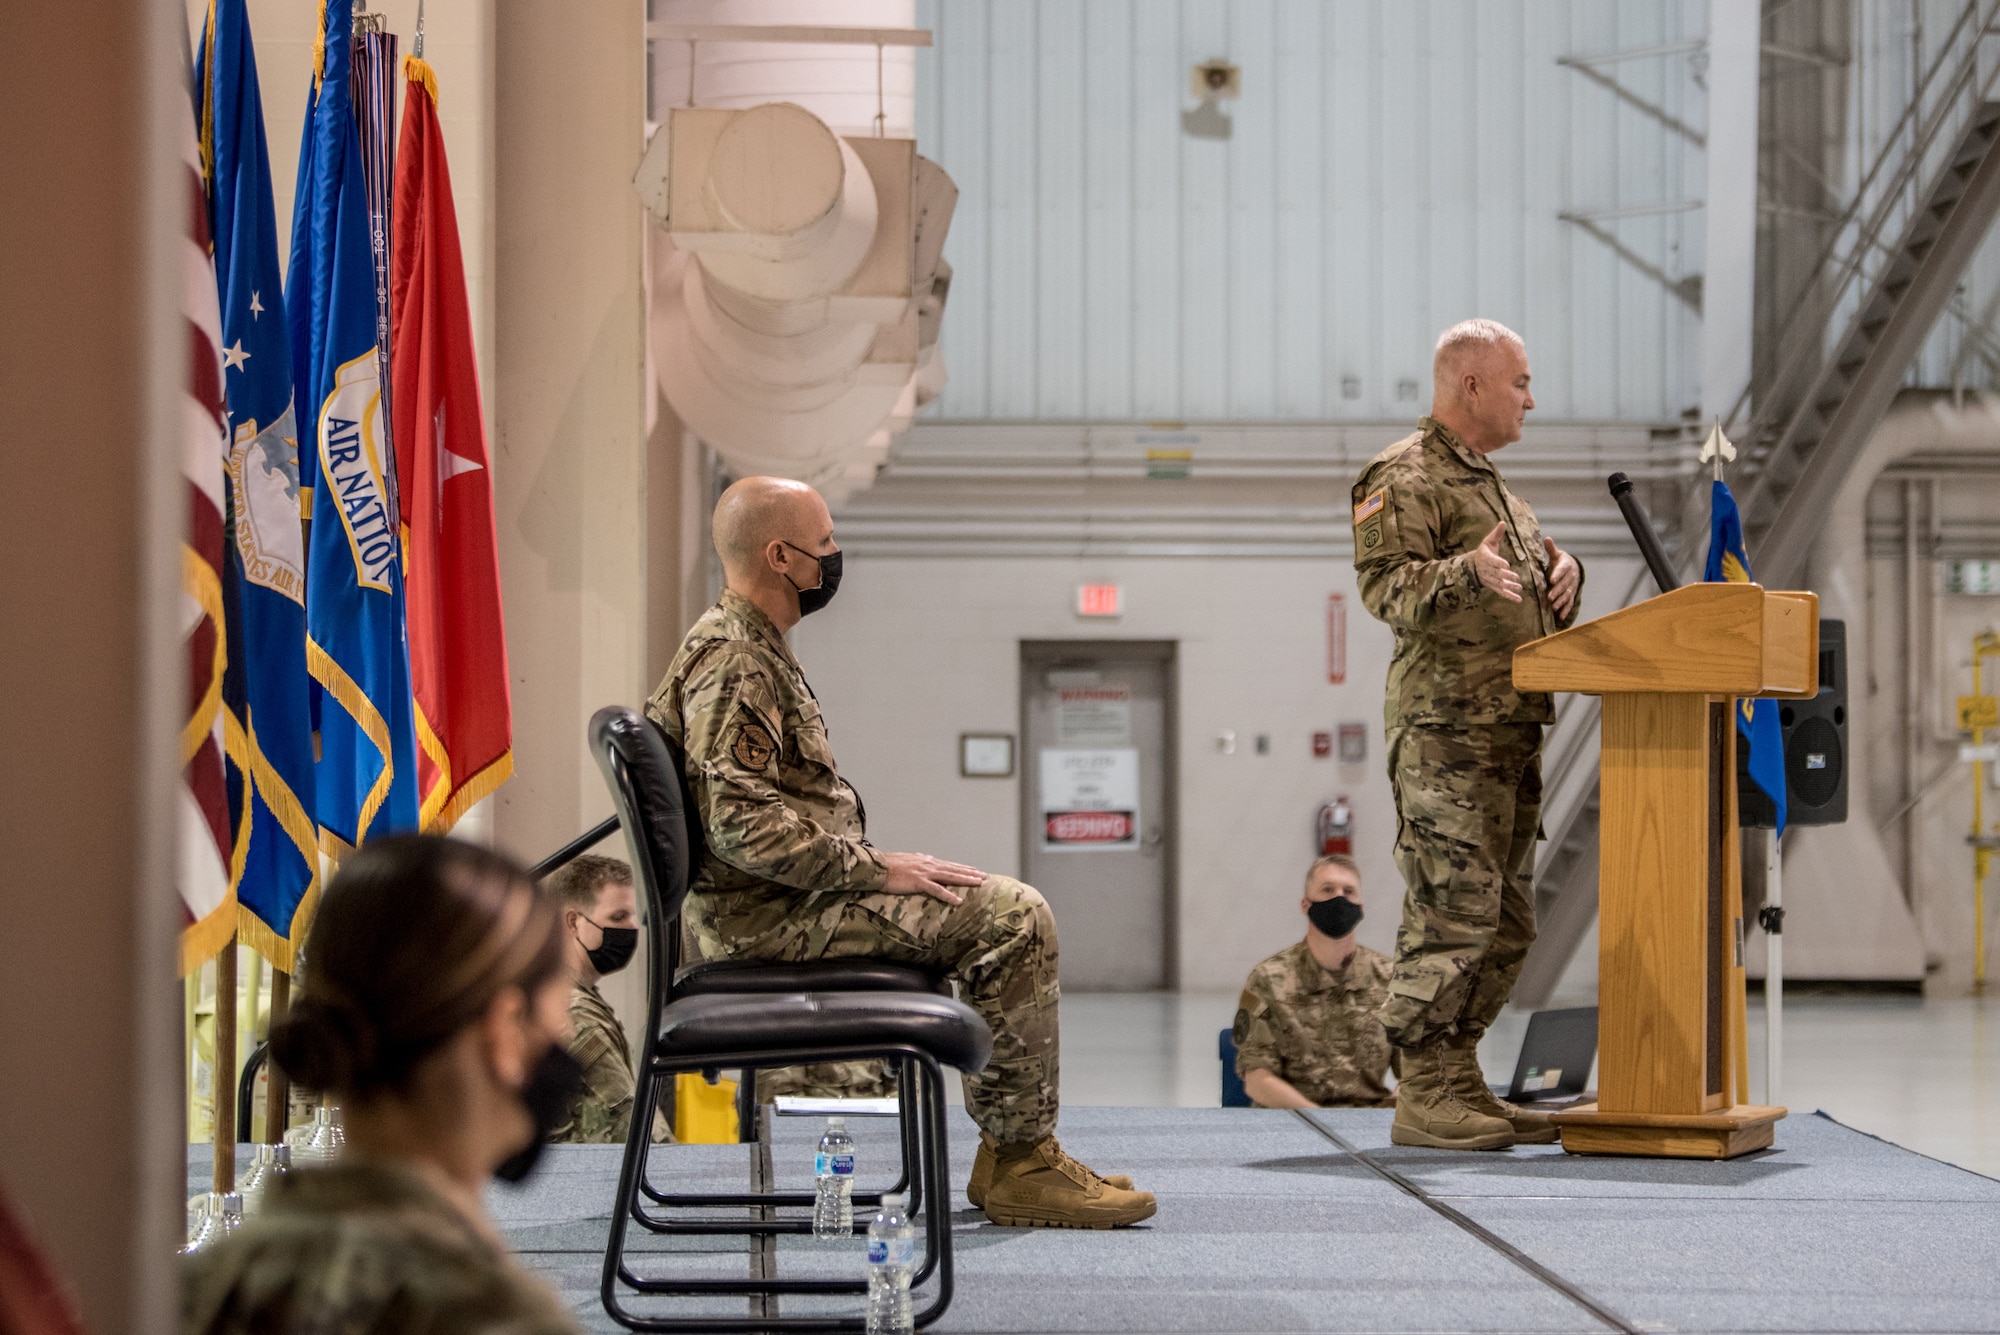 Brig. Gen. Hal Lamberton, adjutant general for the Commonwealth of Kentucky, speaks during the promotion ceremony of Col. George H. Imorde III, incoming commander of the 123rd Mission Support Group, at the Kentucky Air National Guard Base in Louisville, Ky., on Nov. 14, 2020. (U.S. Air National Guard photo by Staff Sgt. Joshua Horton)